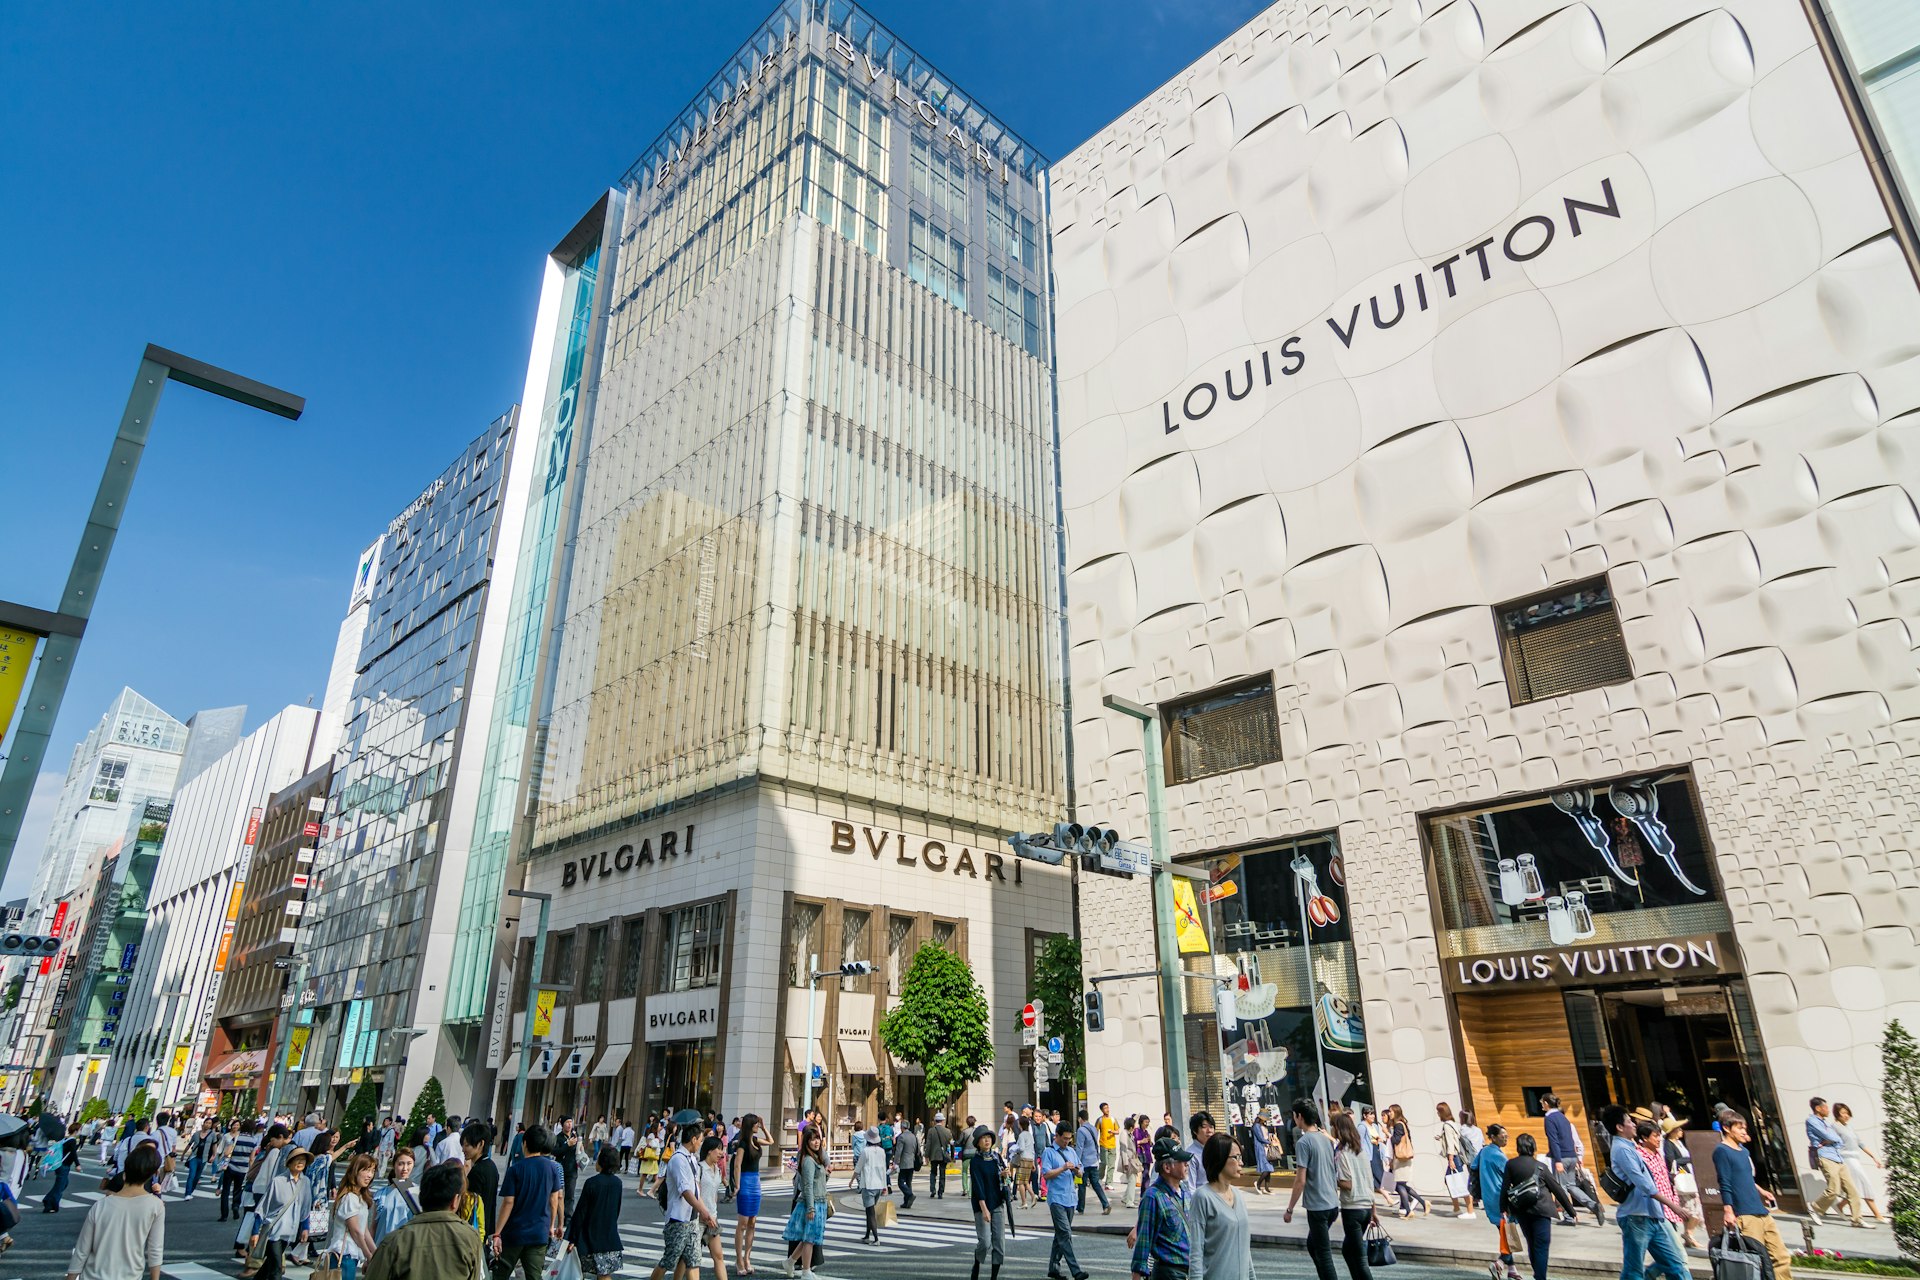 Crowds shopping in the luxury fashion centre in Ginza on weekend afternoons when the central Chuo Dori street is closed to traffic and becomes a large pedestrian zone.